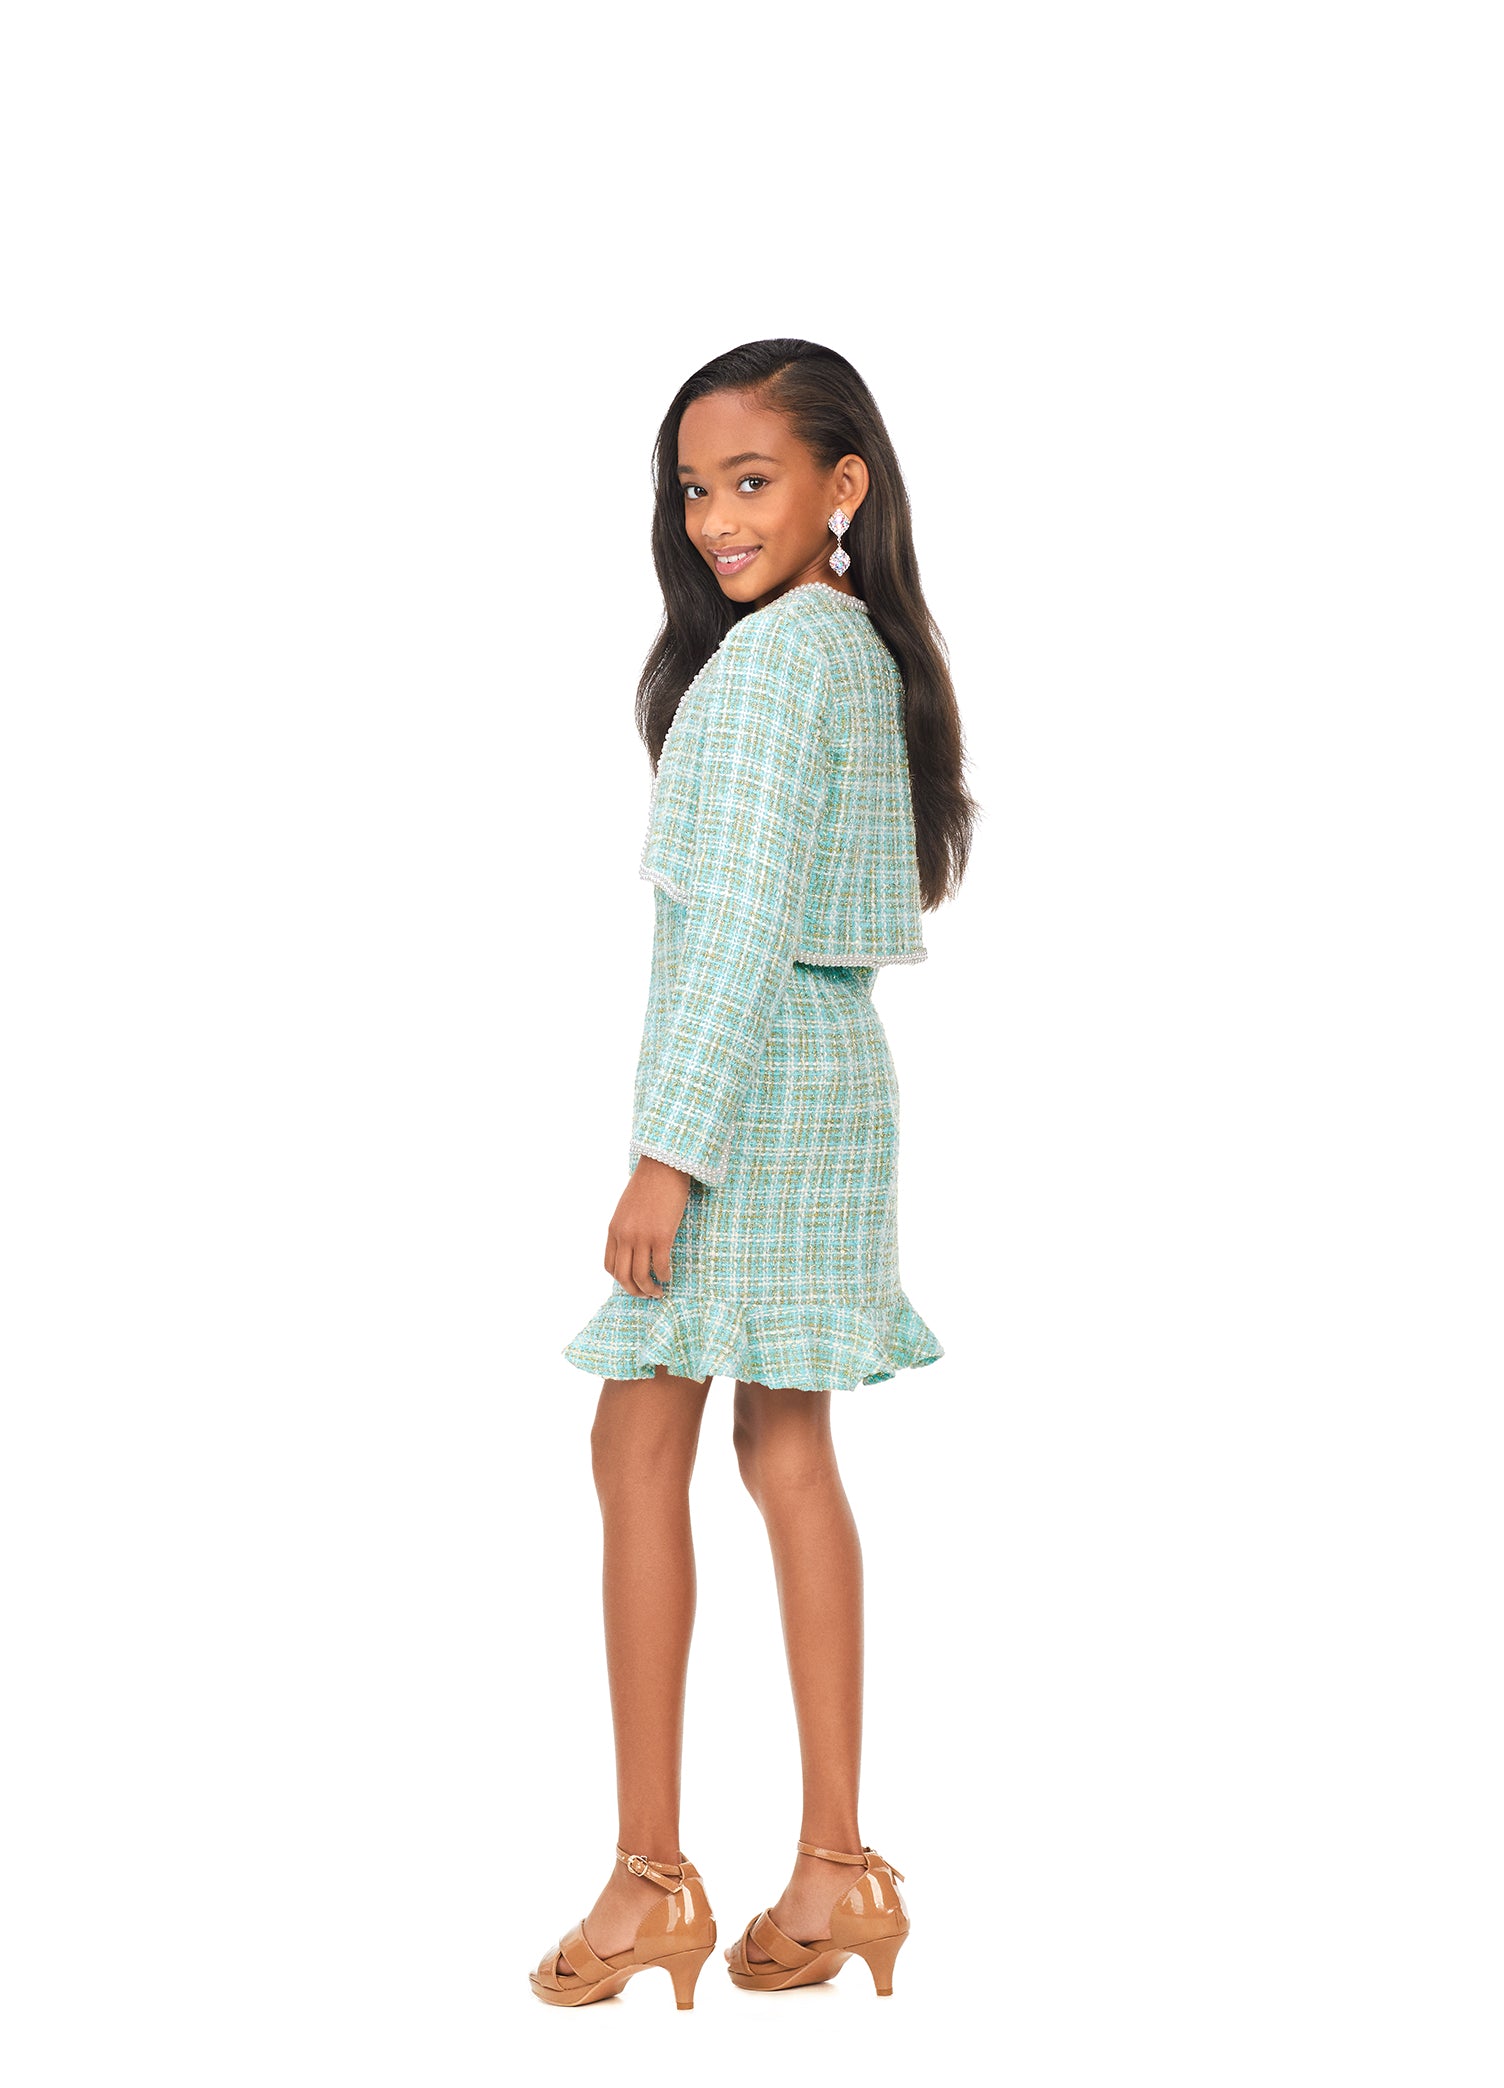 Ashley Lauren 8173 Kids Aqua Tweed Cocktail Dress with Jacket  This gorgeous tweed dress features a crew neckline with fitted skirt. The skirt is complete with a ruffle hemline. The stunning jacket is trimmed in pearls to complete the look.